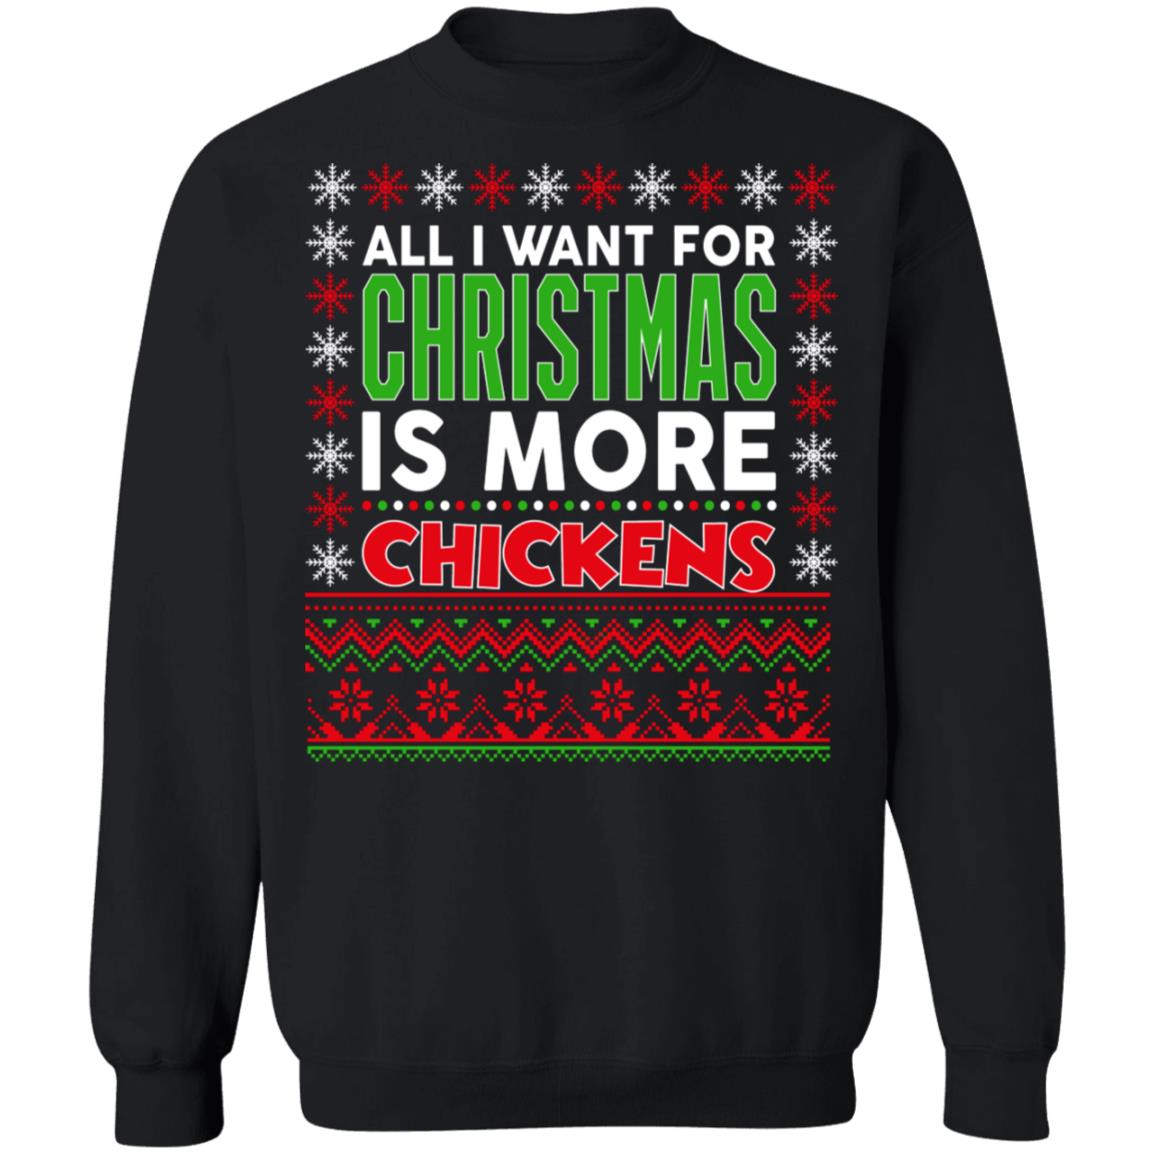 All I Want For Christmas Is More Chickens Sweater